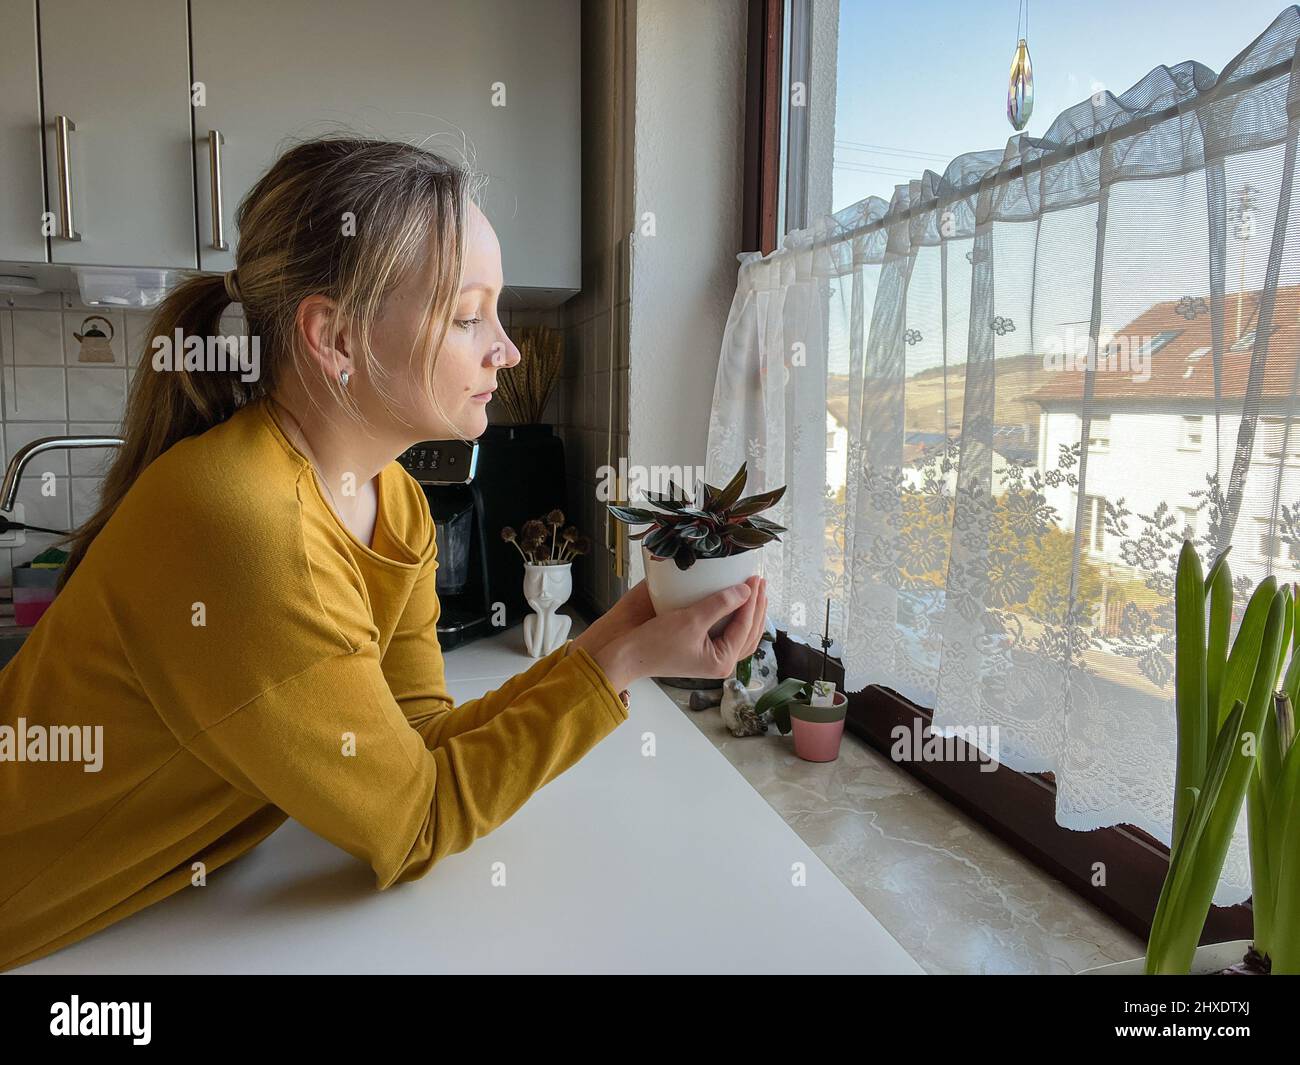 Woman is holding a home plant and studying it Stock Photo